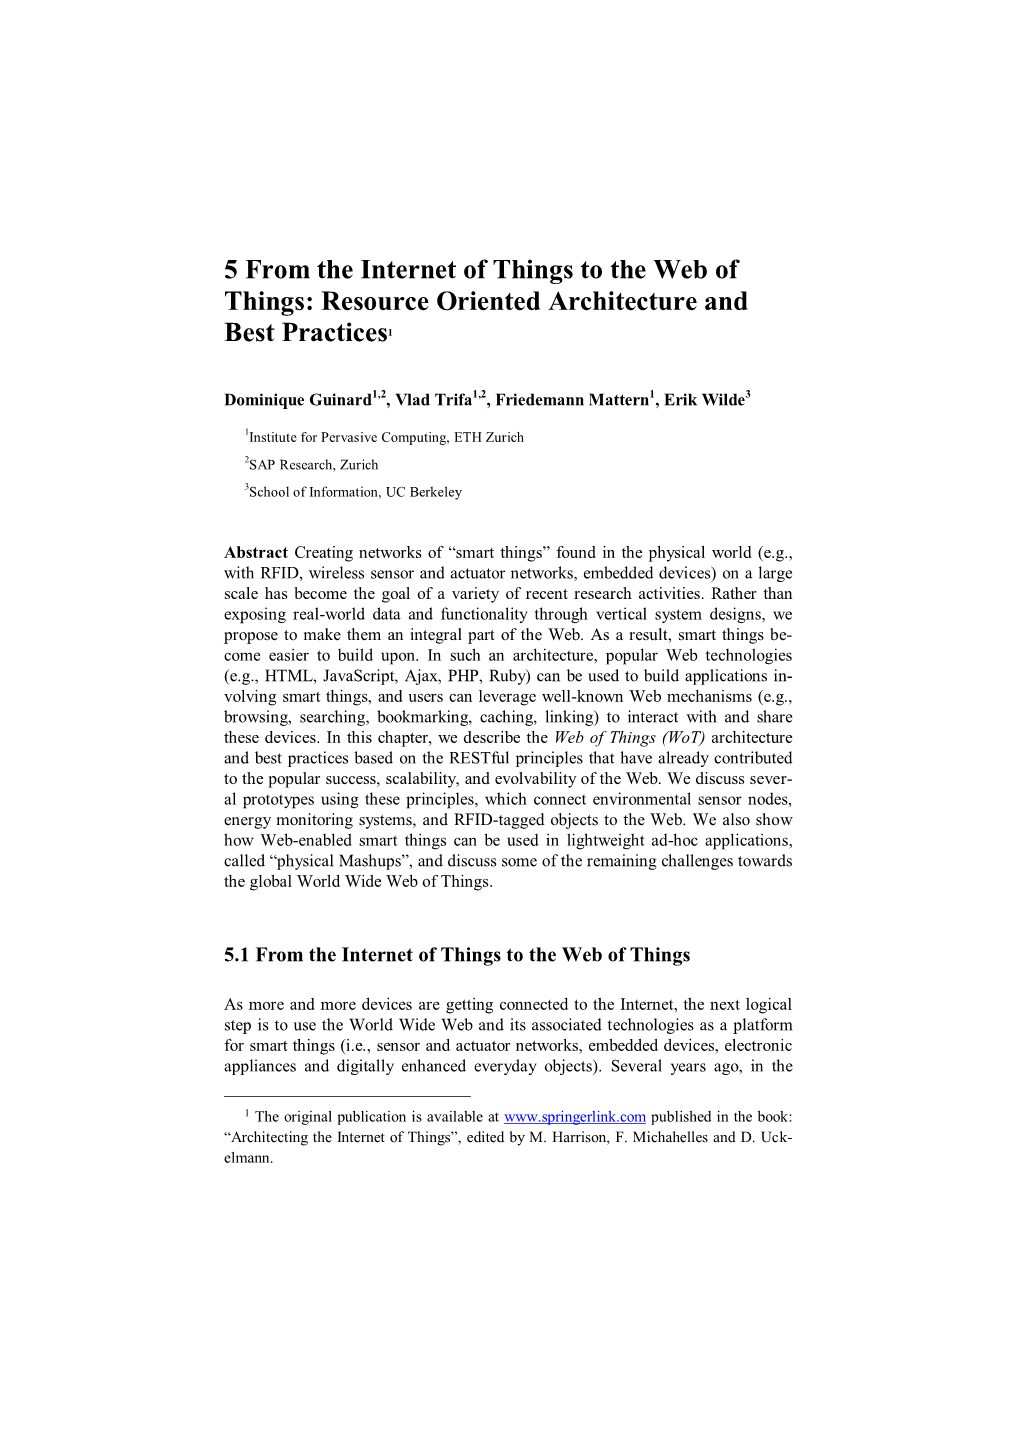 5 from the Internet of Things to the Web of Things: Resource Oriented Architecture and Best Practices1